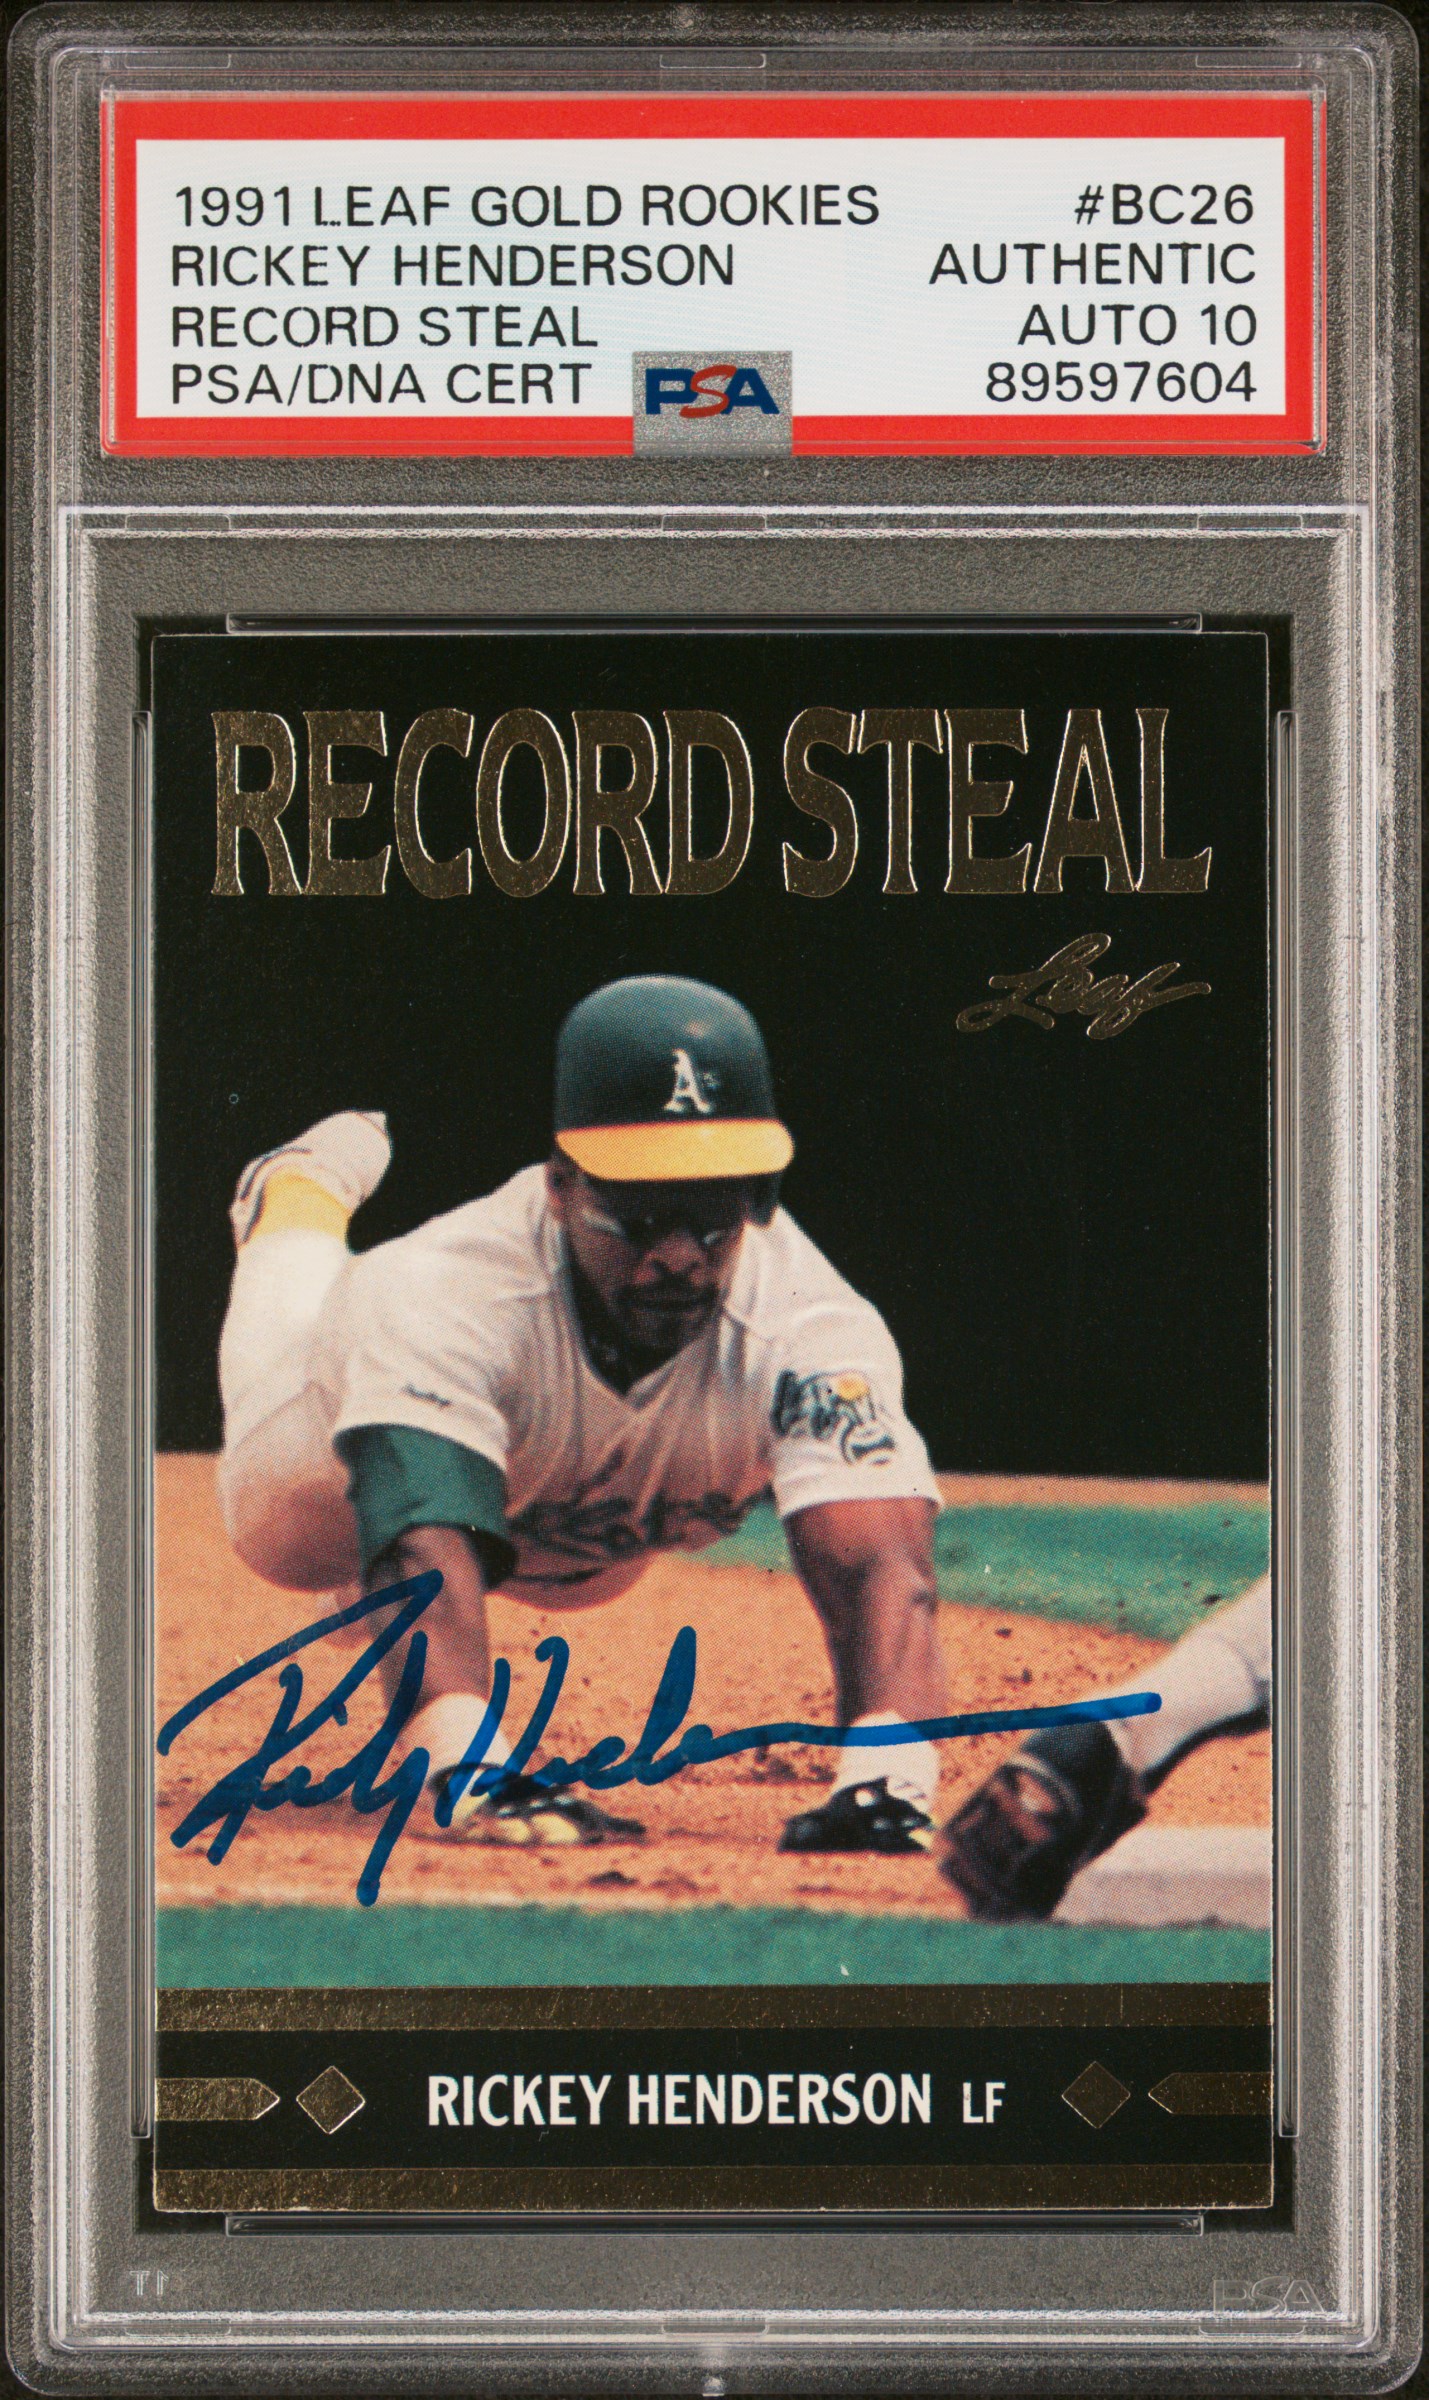 Rickey Henderson 1991 Leaf Gold Rookies Record Steal Card #BC26 Auto PSA 10 7604